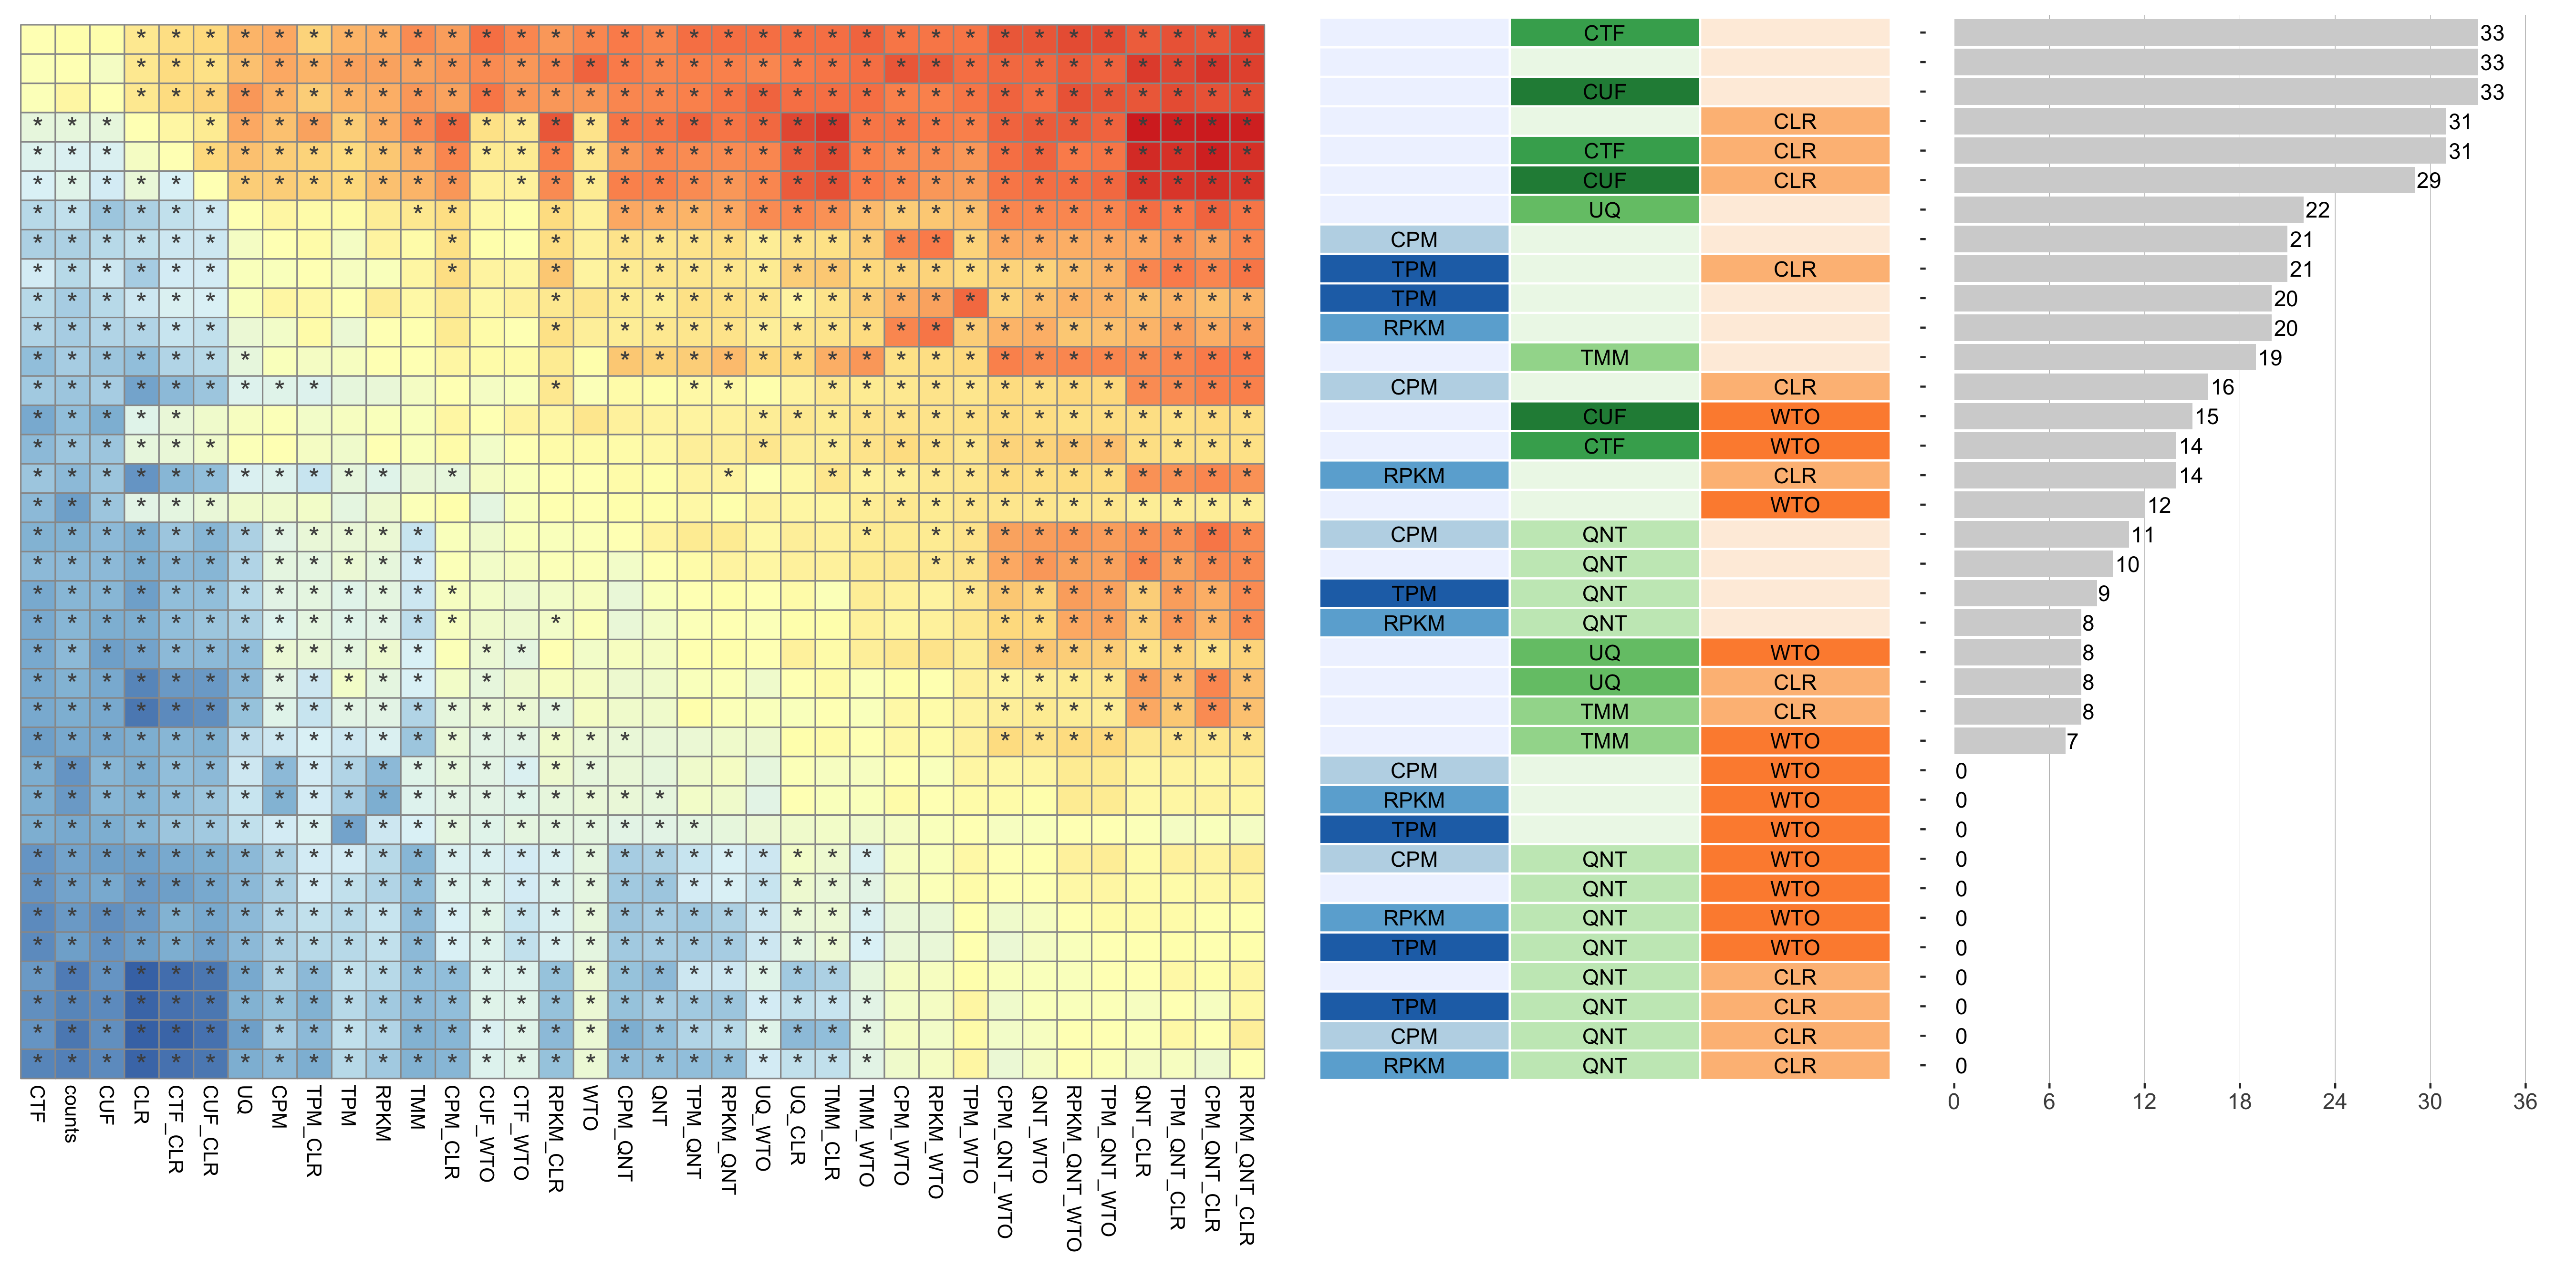 **Dataset-level pairwise comparison of workflow performance.** (**left**) The heatmap shows the relative performance of a pair of workflows, corresponding to a row and a column, directly compared to each other for the SRA datasets based on the tissue-aware gold standard. The color in each cell (row, column) represents the proportion of datasets for which the workflow along the row has a higher log2(auPRC/prior) than the workflow along the column. Comparisons that are statistically significant (corrected p < 0.01) based on a paired Wilcoxon test are marked with an asterisk. (**middle**) The workflows (rows) are described in terms of the specific method used in the within-sample normalization (blues), between-sample normalization (greens), and network transformation (oranges) stages. (**right**) The barplot shows the number of times each workflow was significantly greater than another workflow.